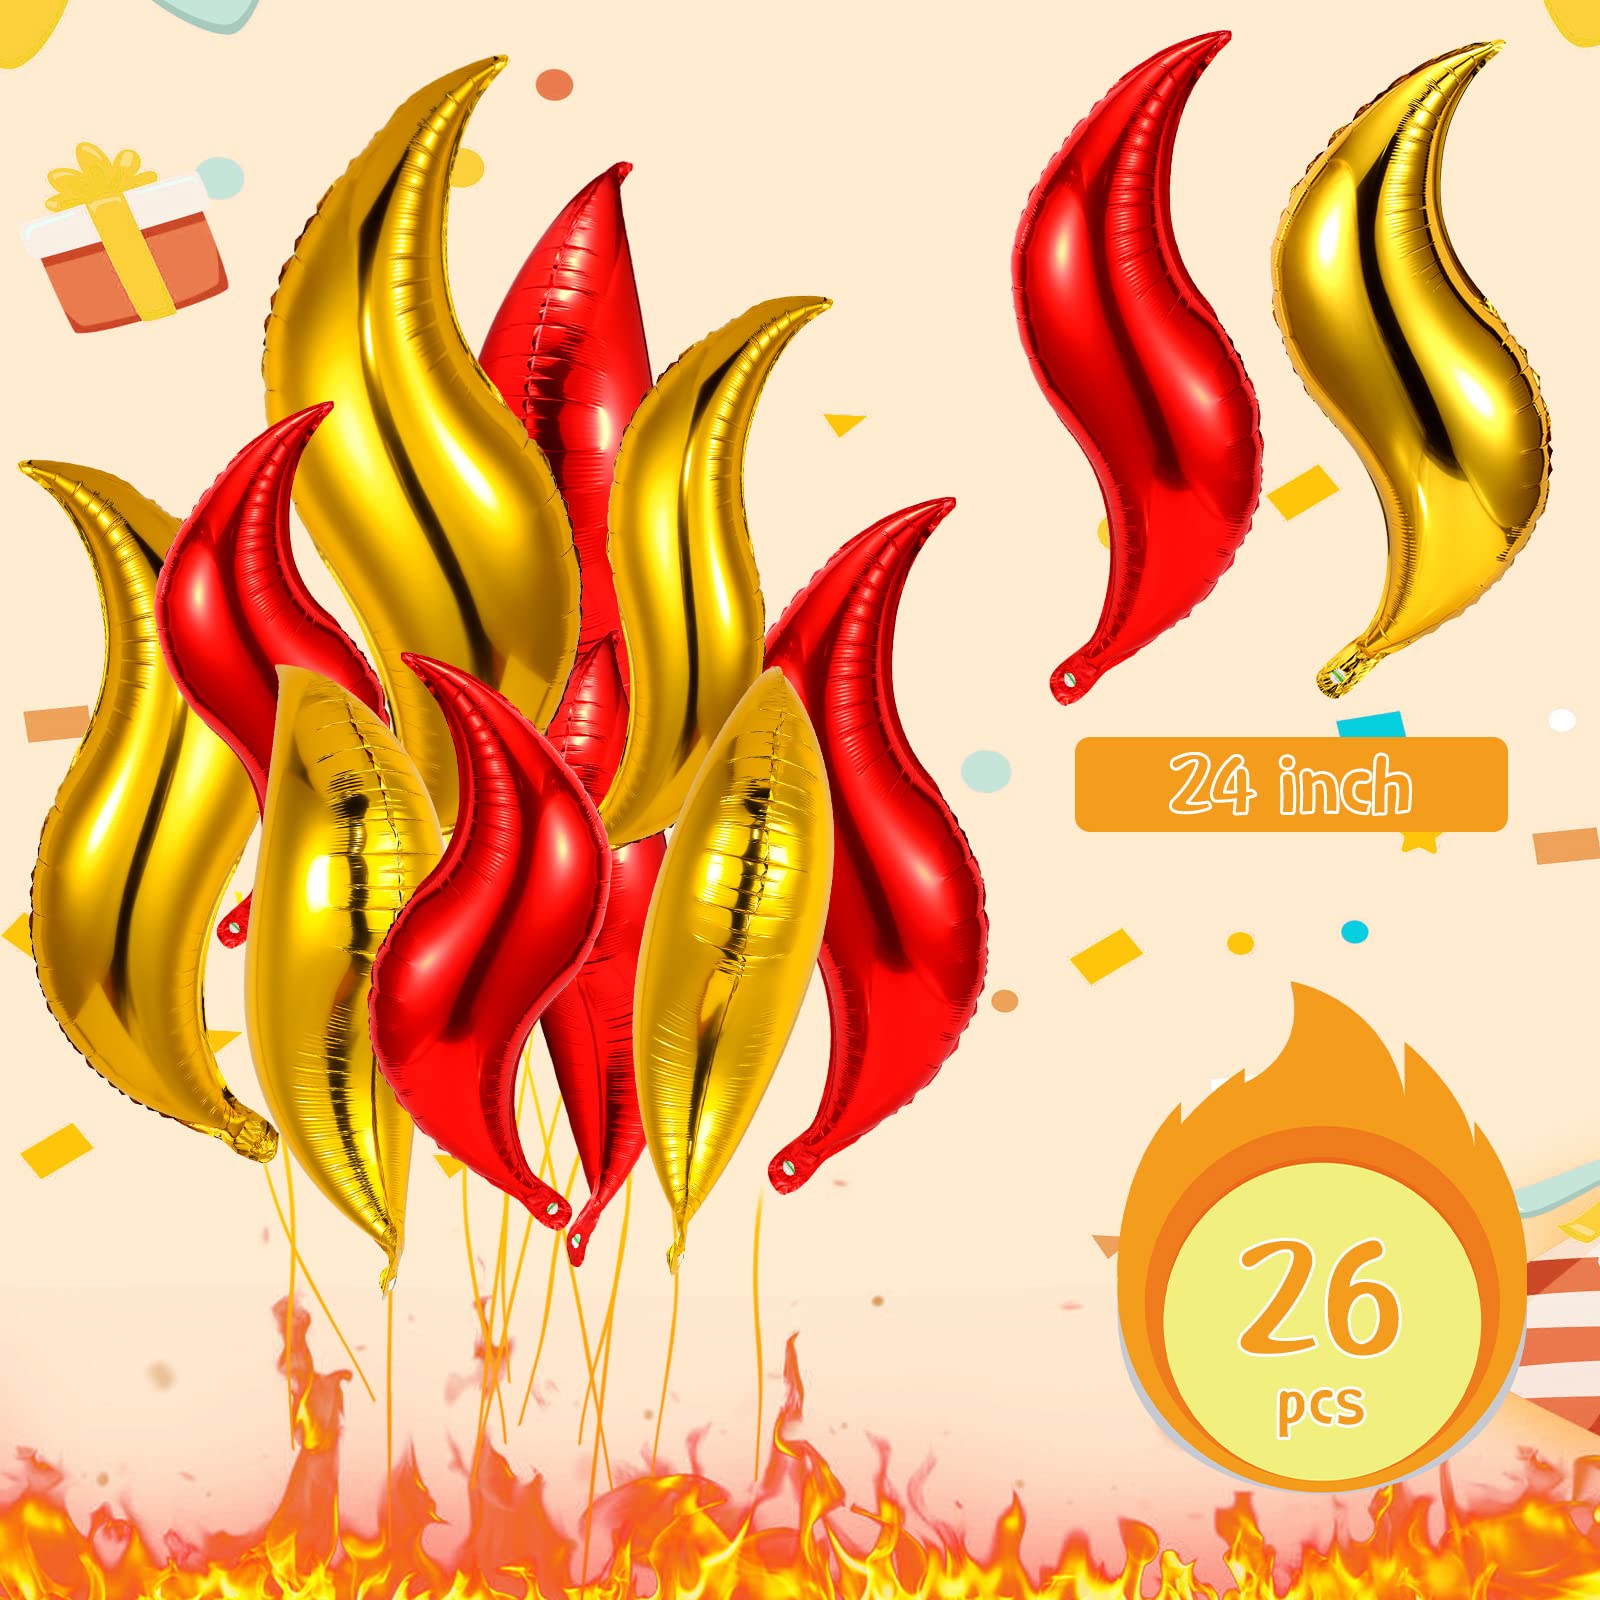 Shappy 26 Pcs Fire Balloons Firefighter Birthday Party Decorations 24 Inch Flame Balloons Fake Campfire Red and Gold Balloon for Fire Truck Fireman Party Supplies Summer Camping